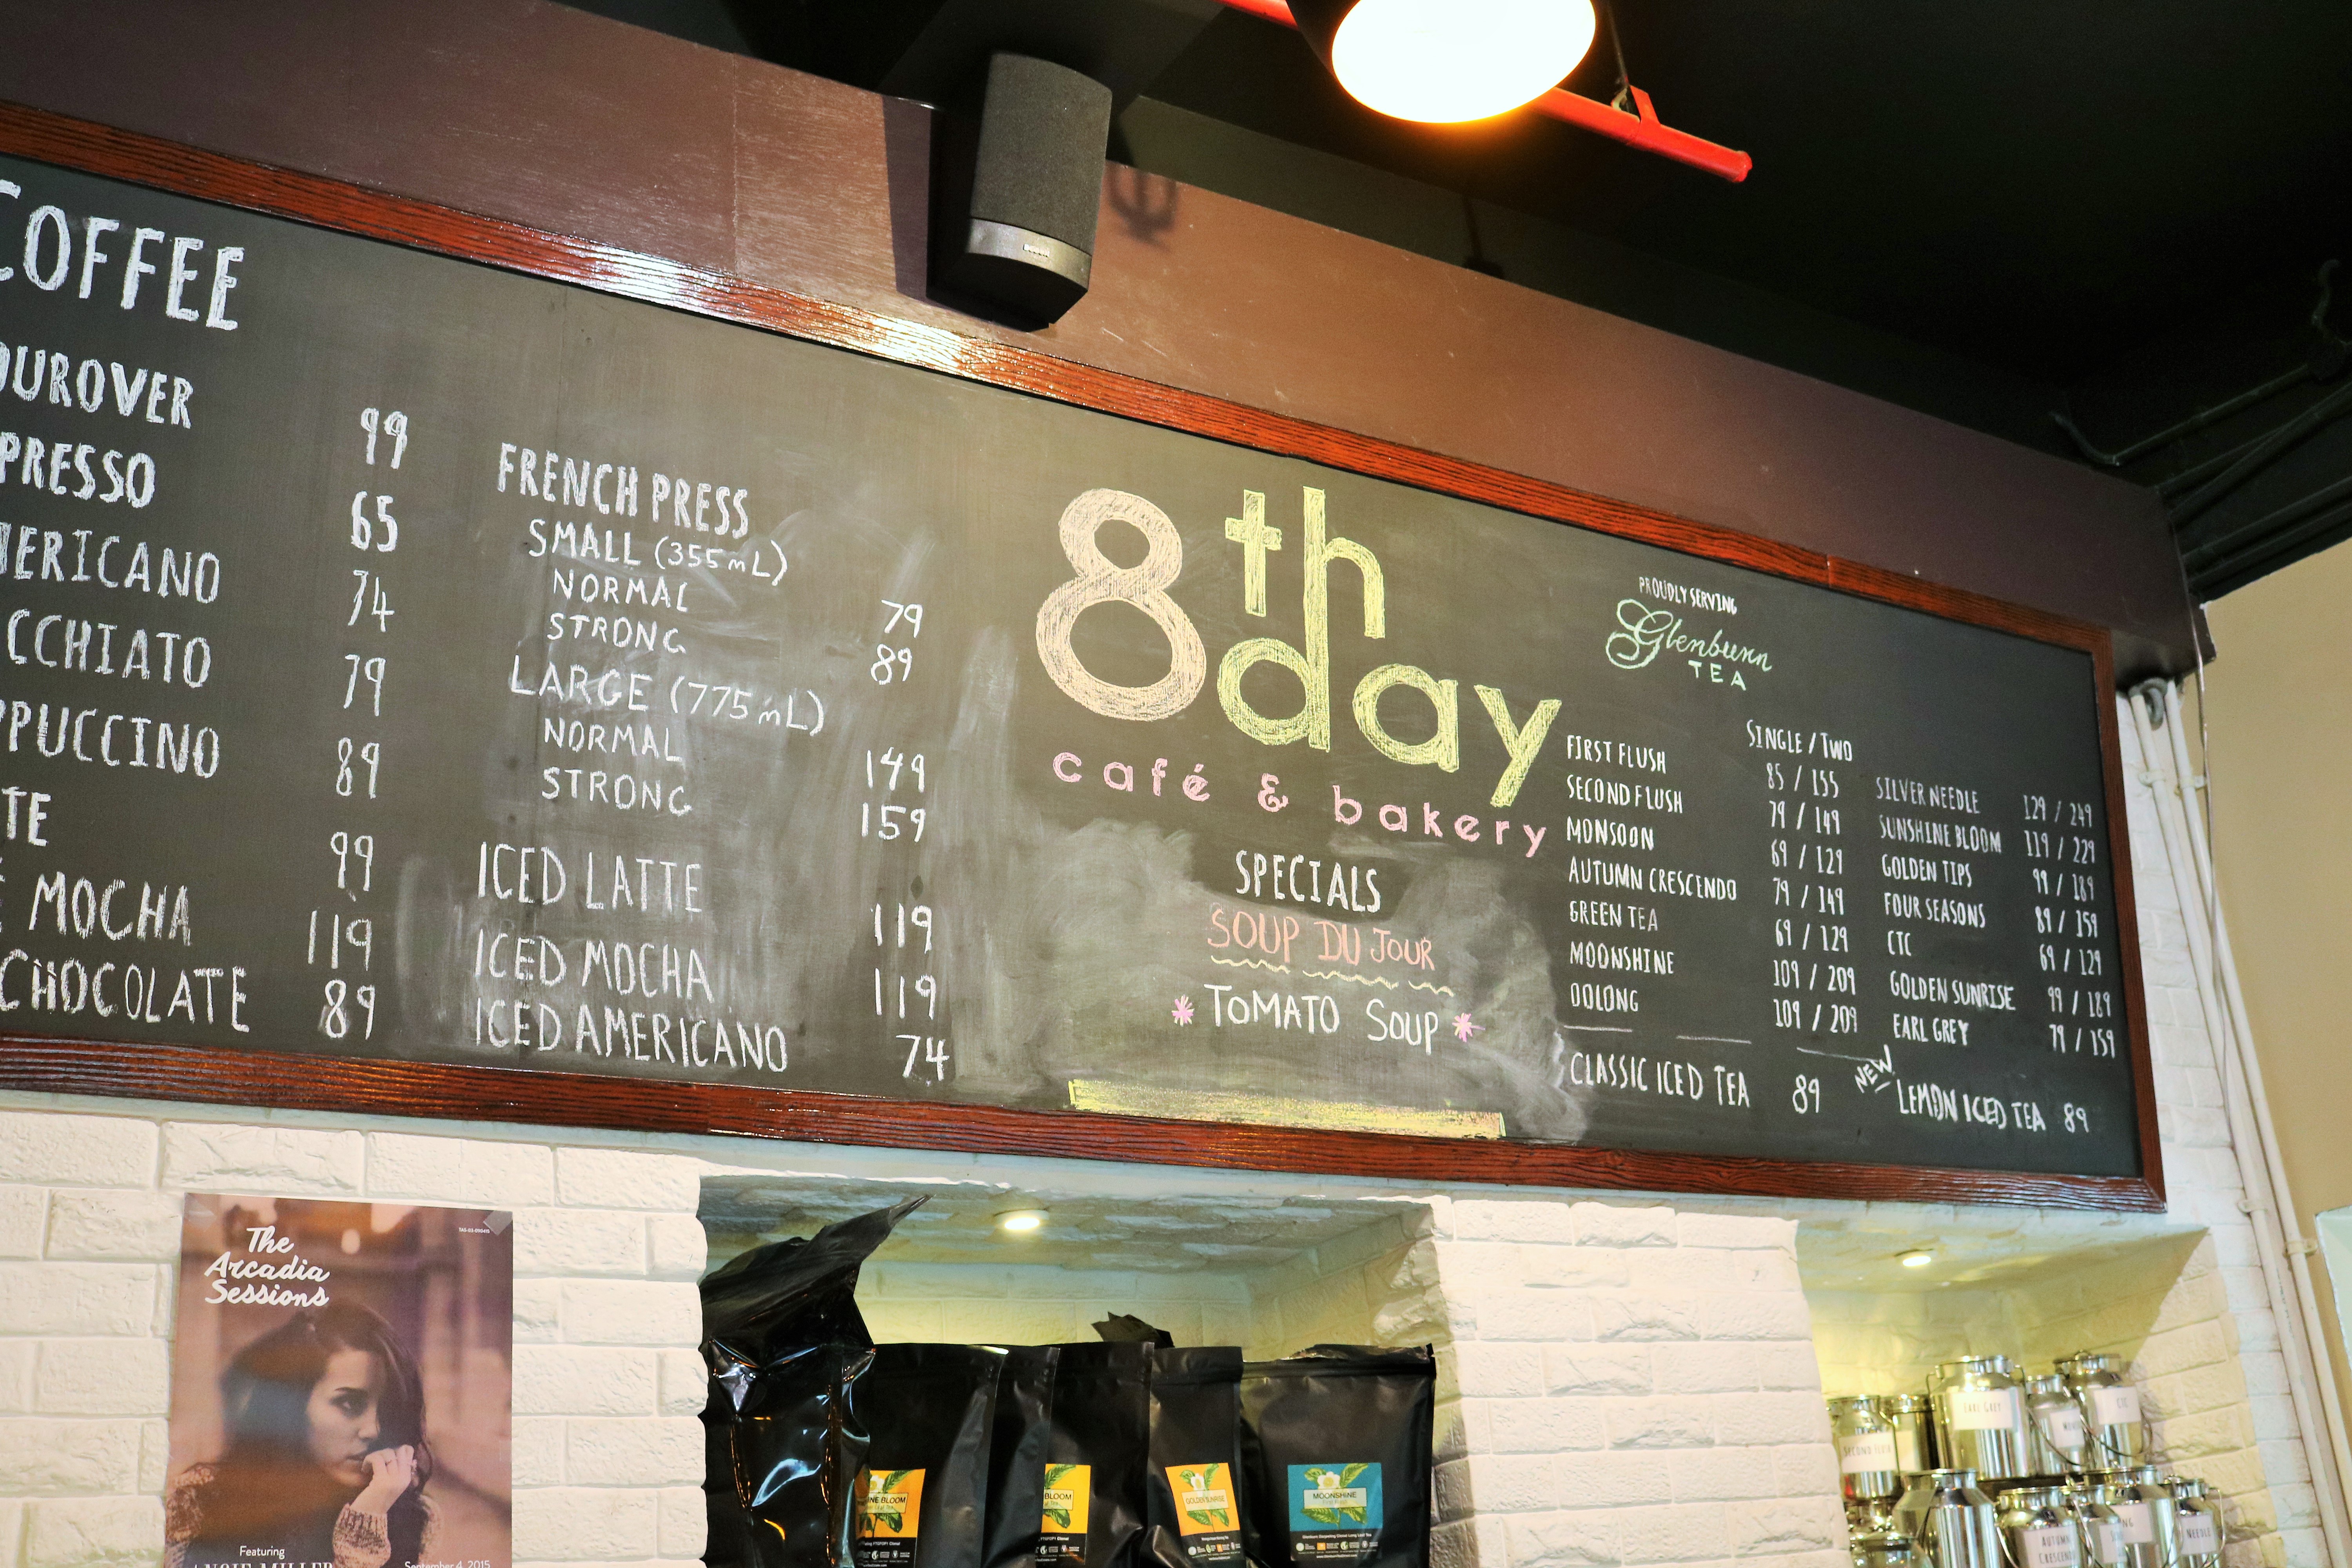 8th Day Cafe and Bakery